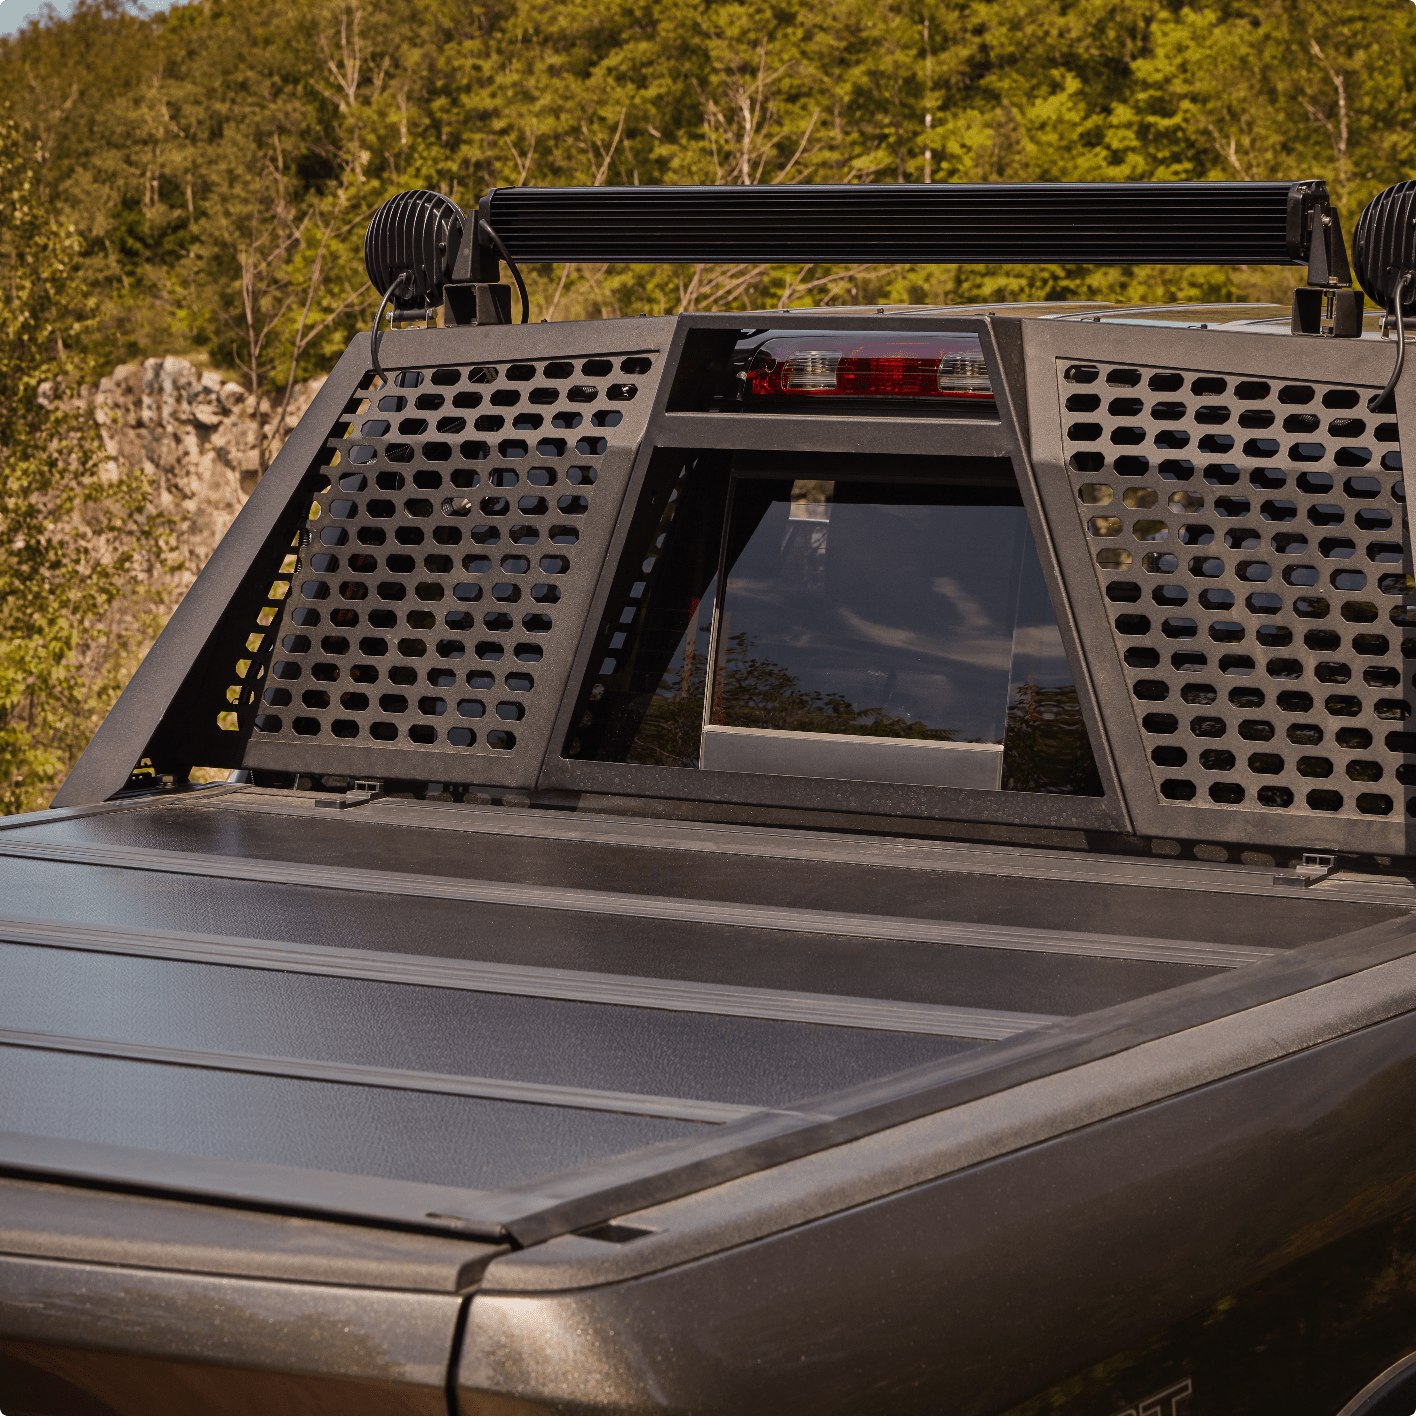 Black truck with folding tonneau cover and mounted black steel cargo rack.